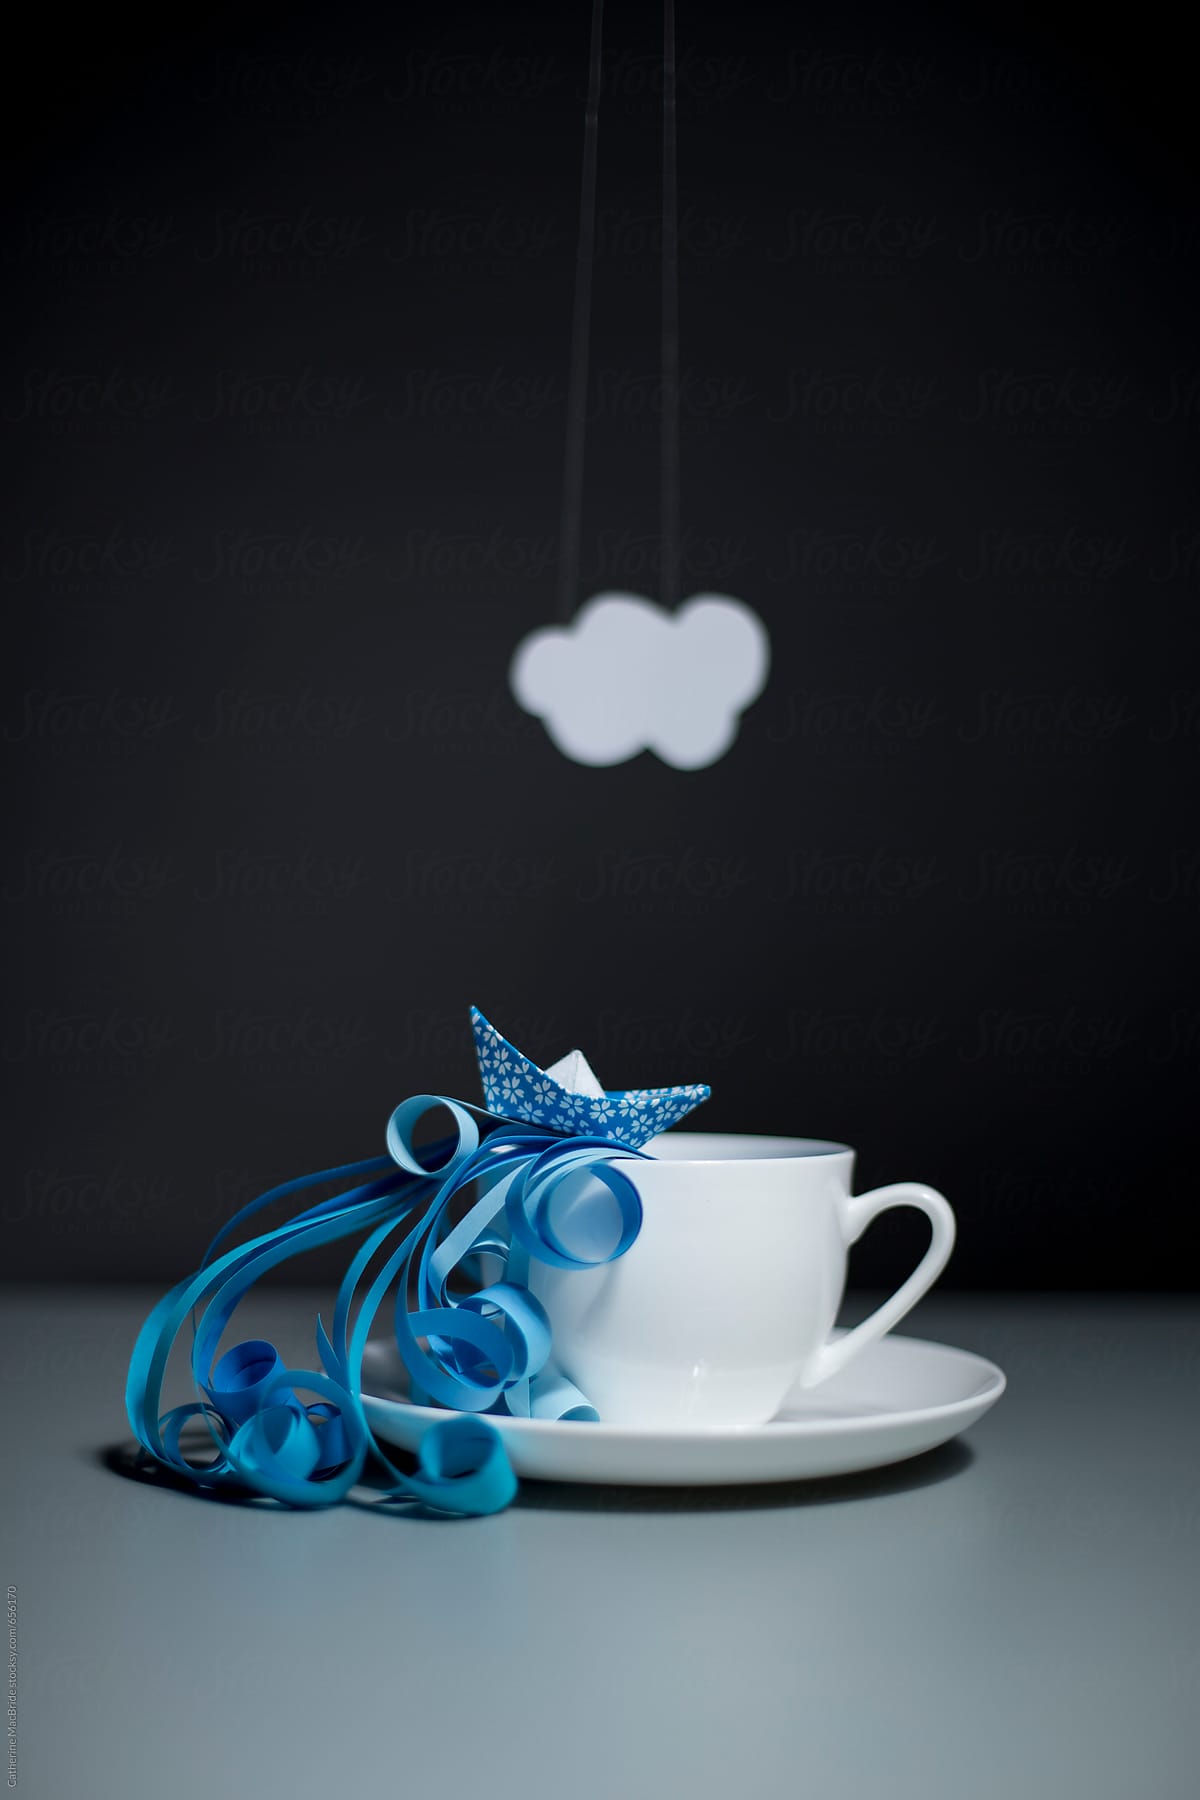 Paper craft storm in a teacup with waves, boat and cloud